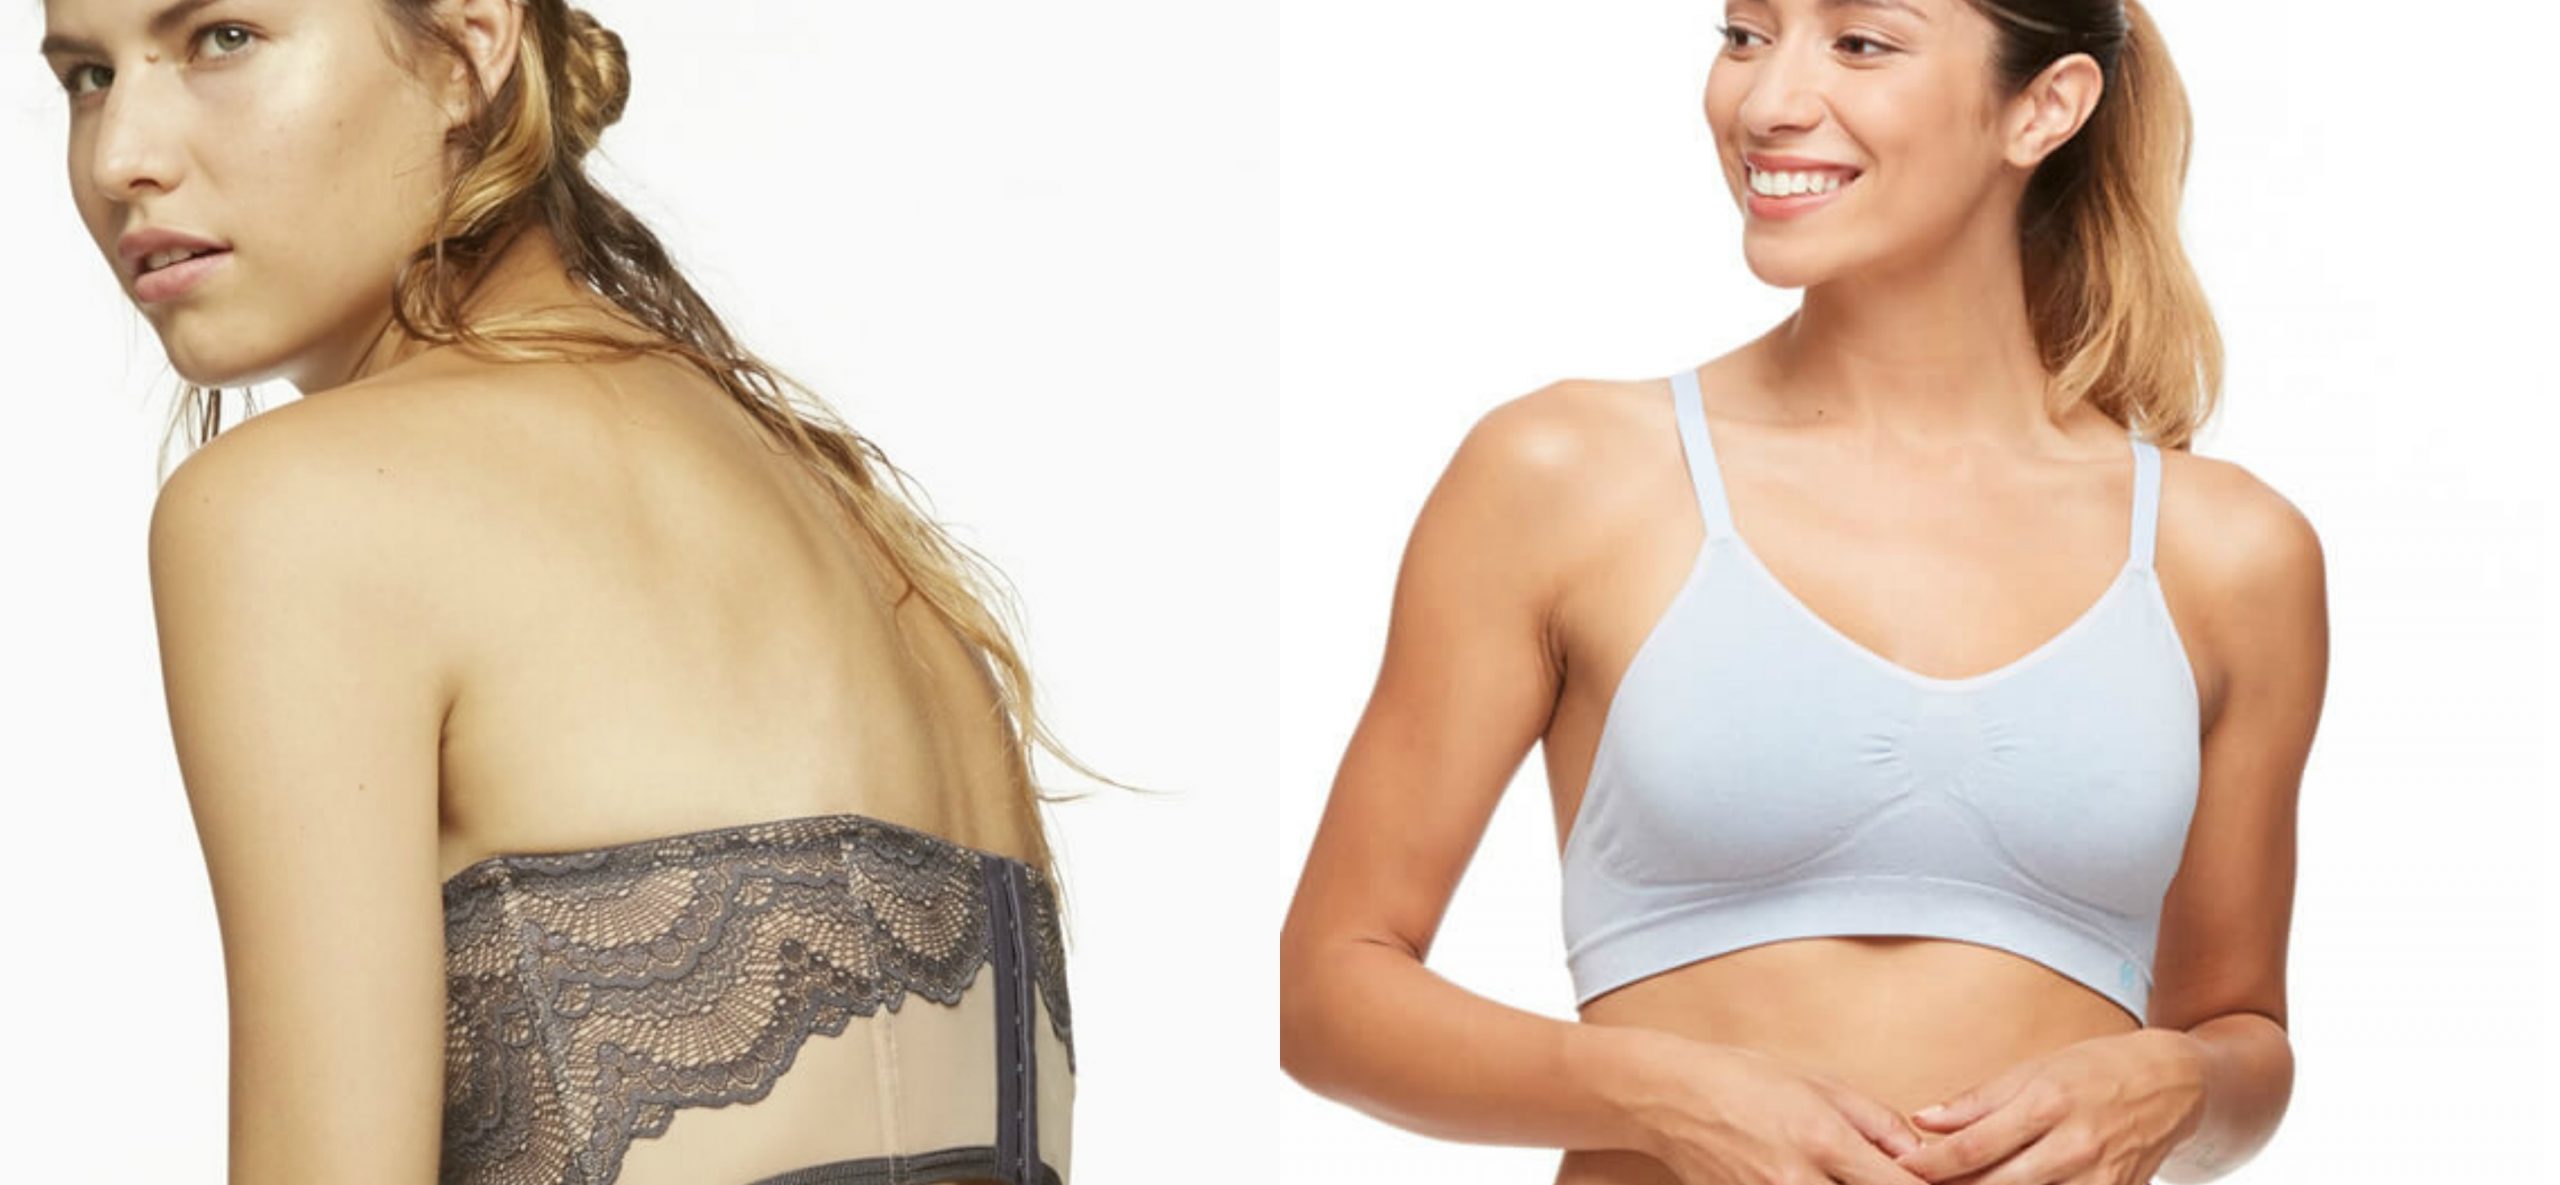 What bras should I wear with sheer tops? - Quora